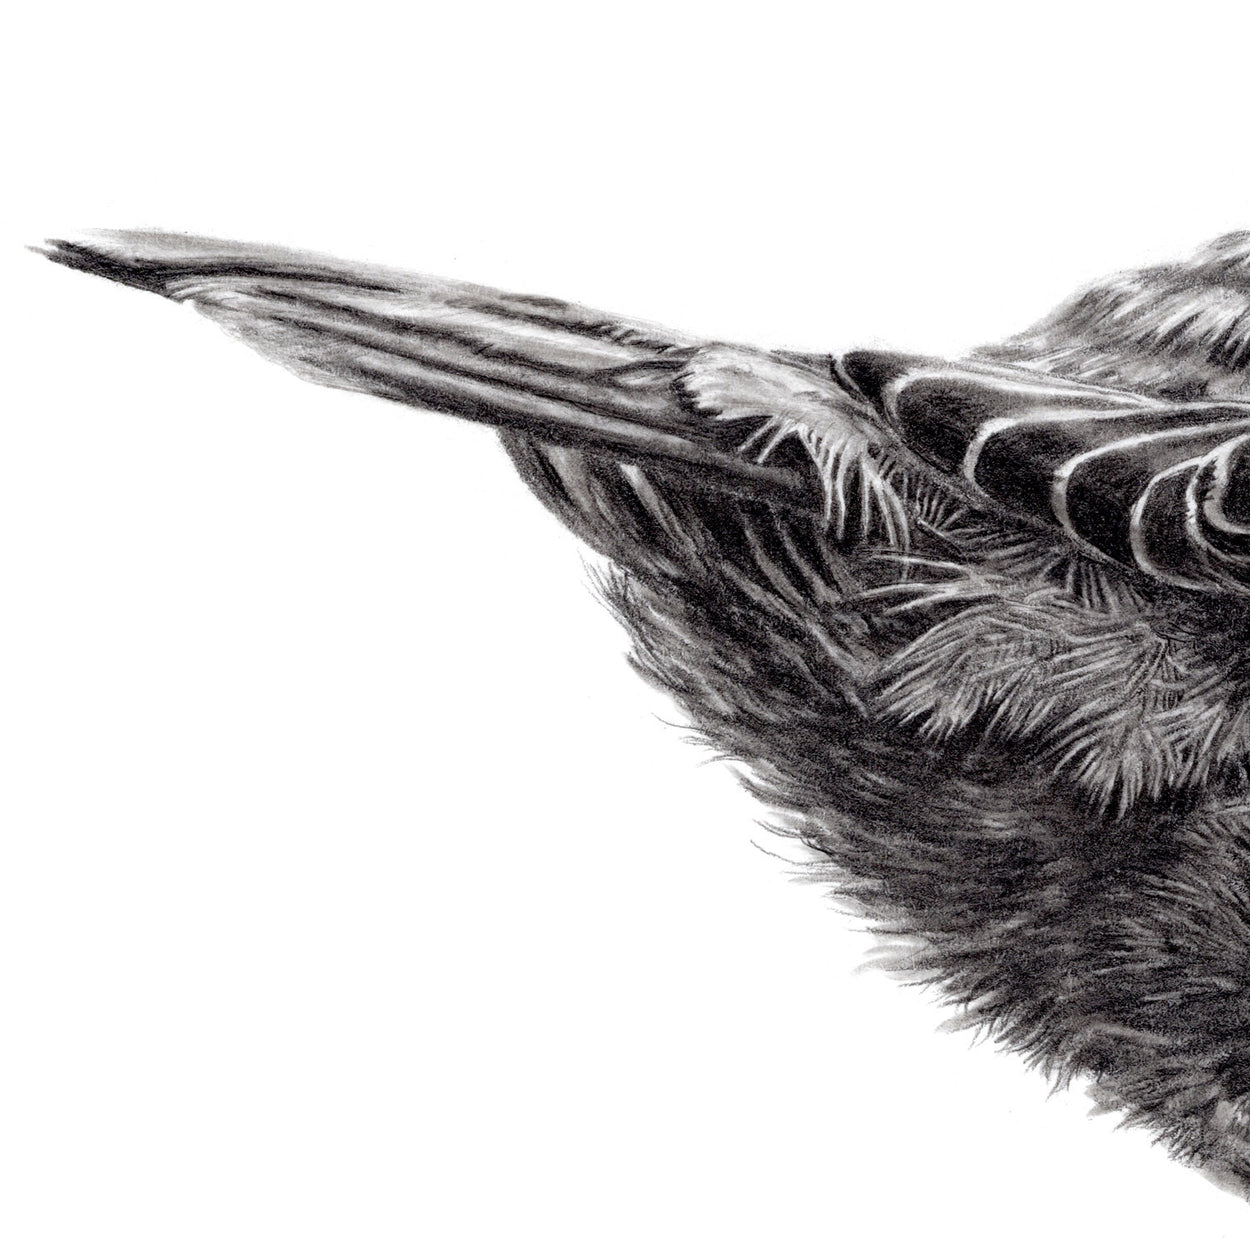 Dipper Bird Feathers Drawing Close-up - The Thriving Wild